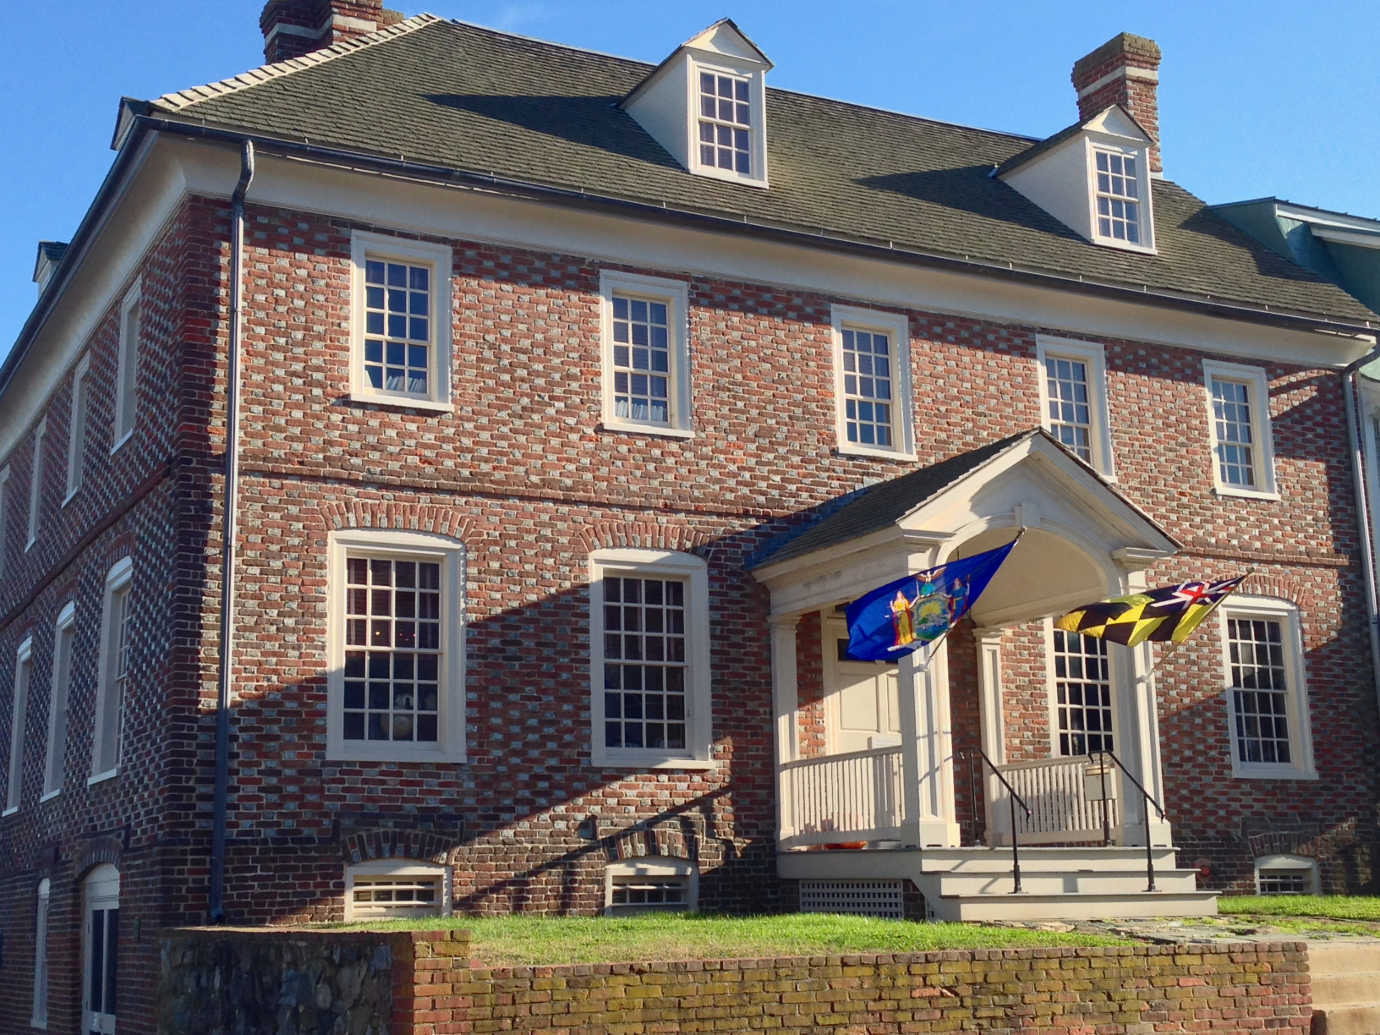 The Starr Center is headquartered in the Custom House (c. 1765), where Patrick Henry Fellows have their offices. Image courtesy of the Starr Center.